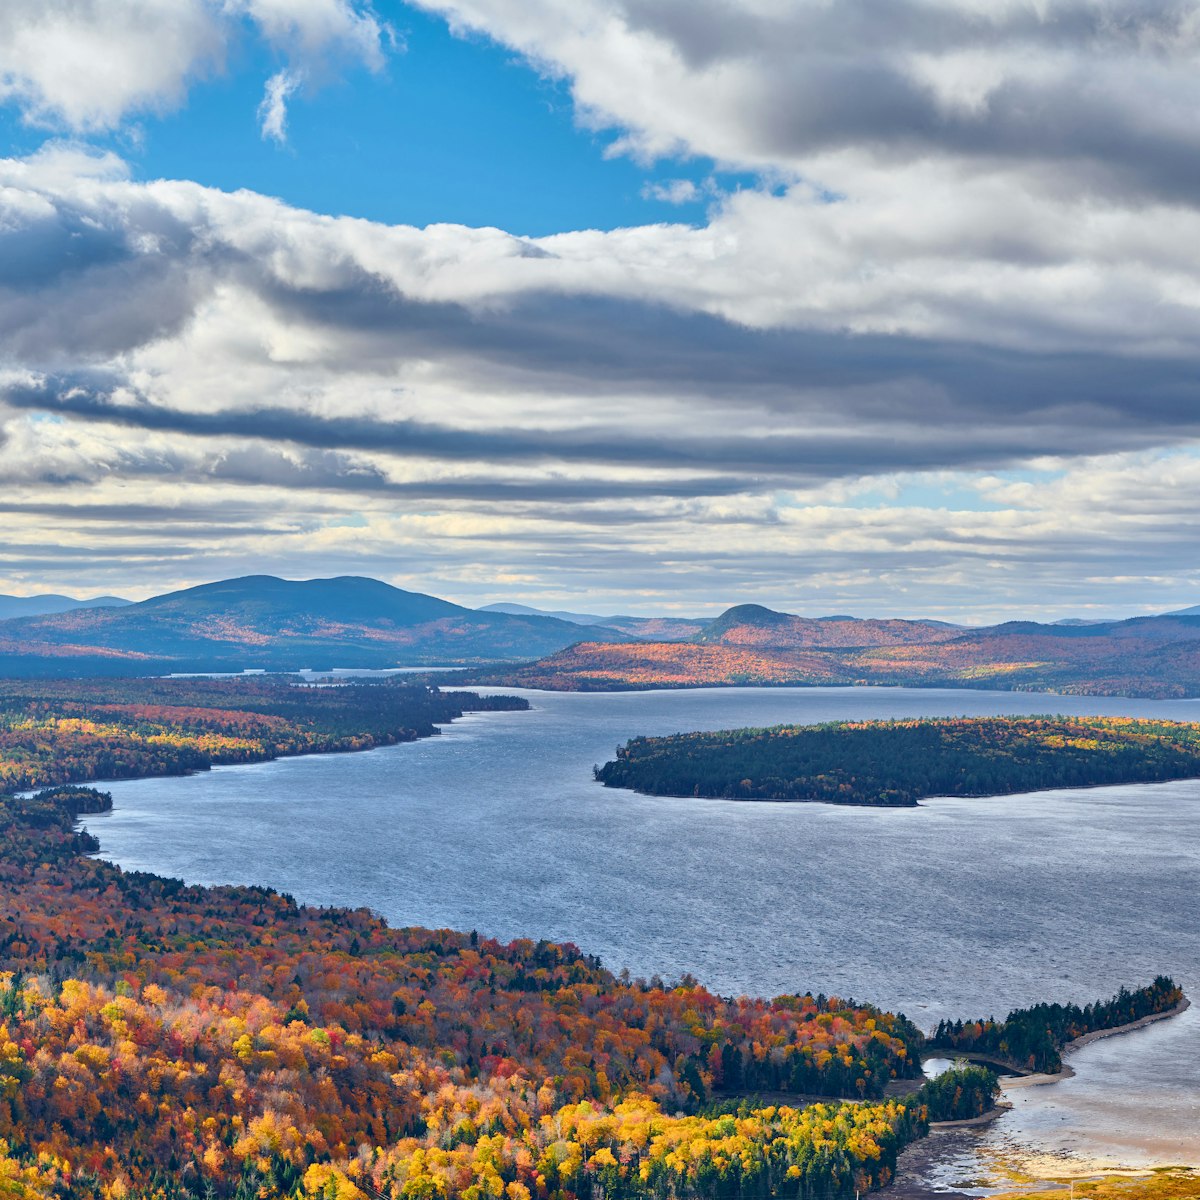 Mooselookmeguntic Lake at autumn view from Height of the Land viewpoint, Maine, USA.